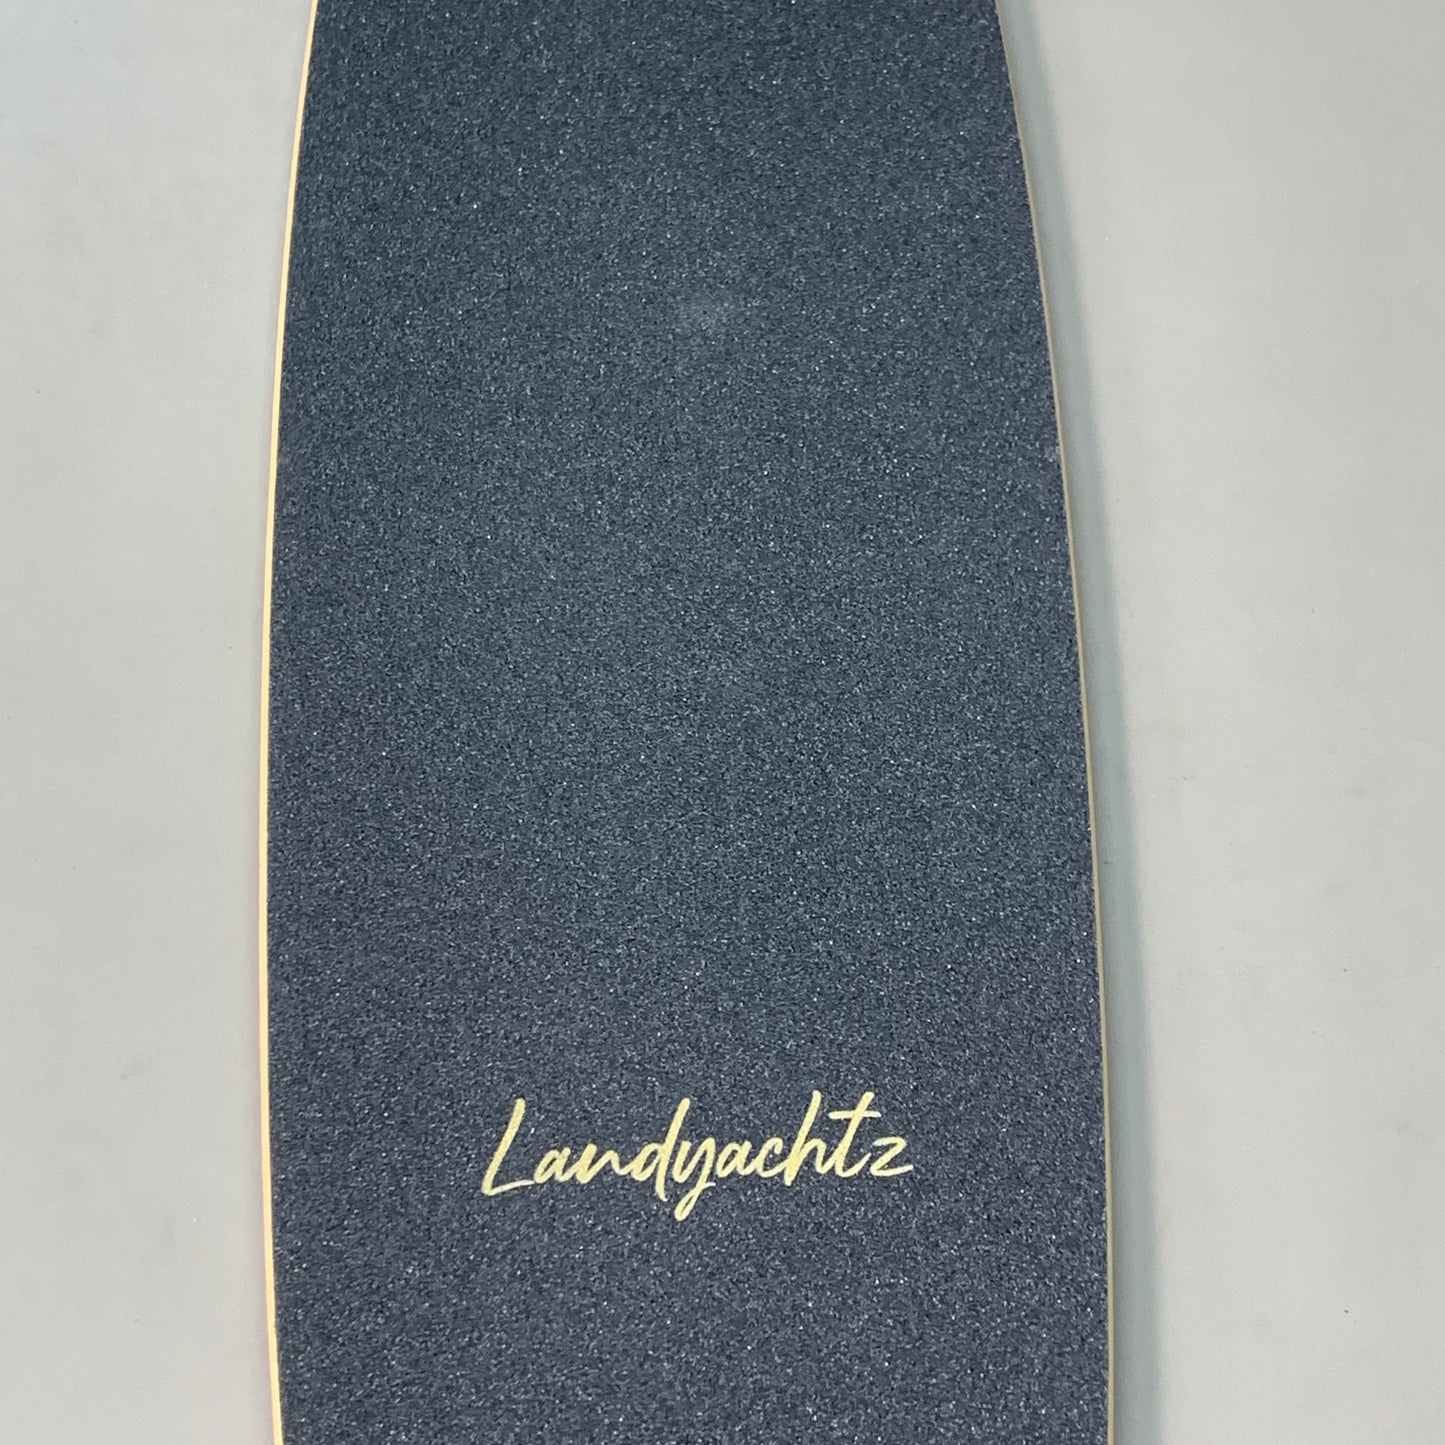 LANDYACHTZ Combined Pintail White/Maple Longboard  36"x8.5" (New Other)